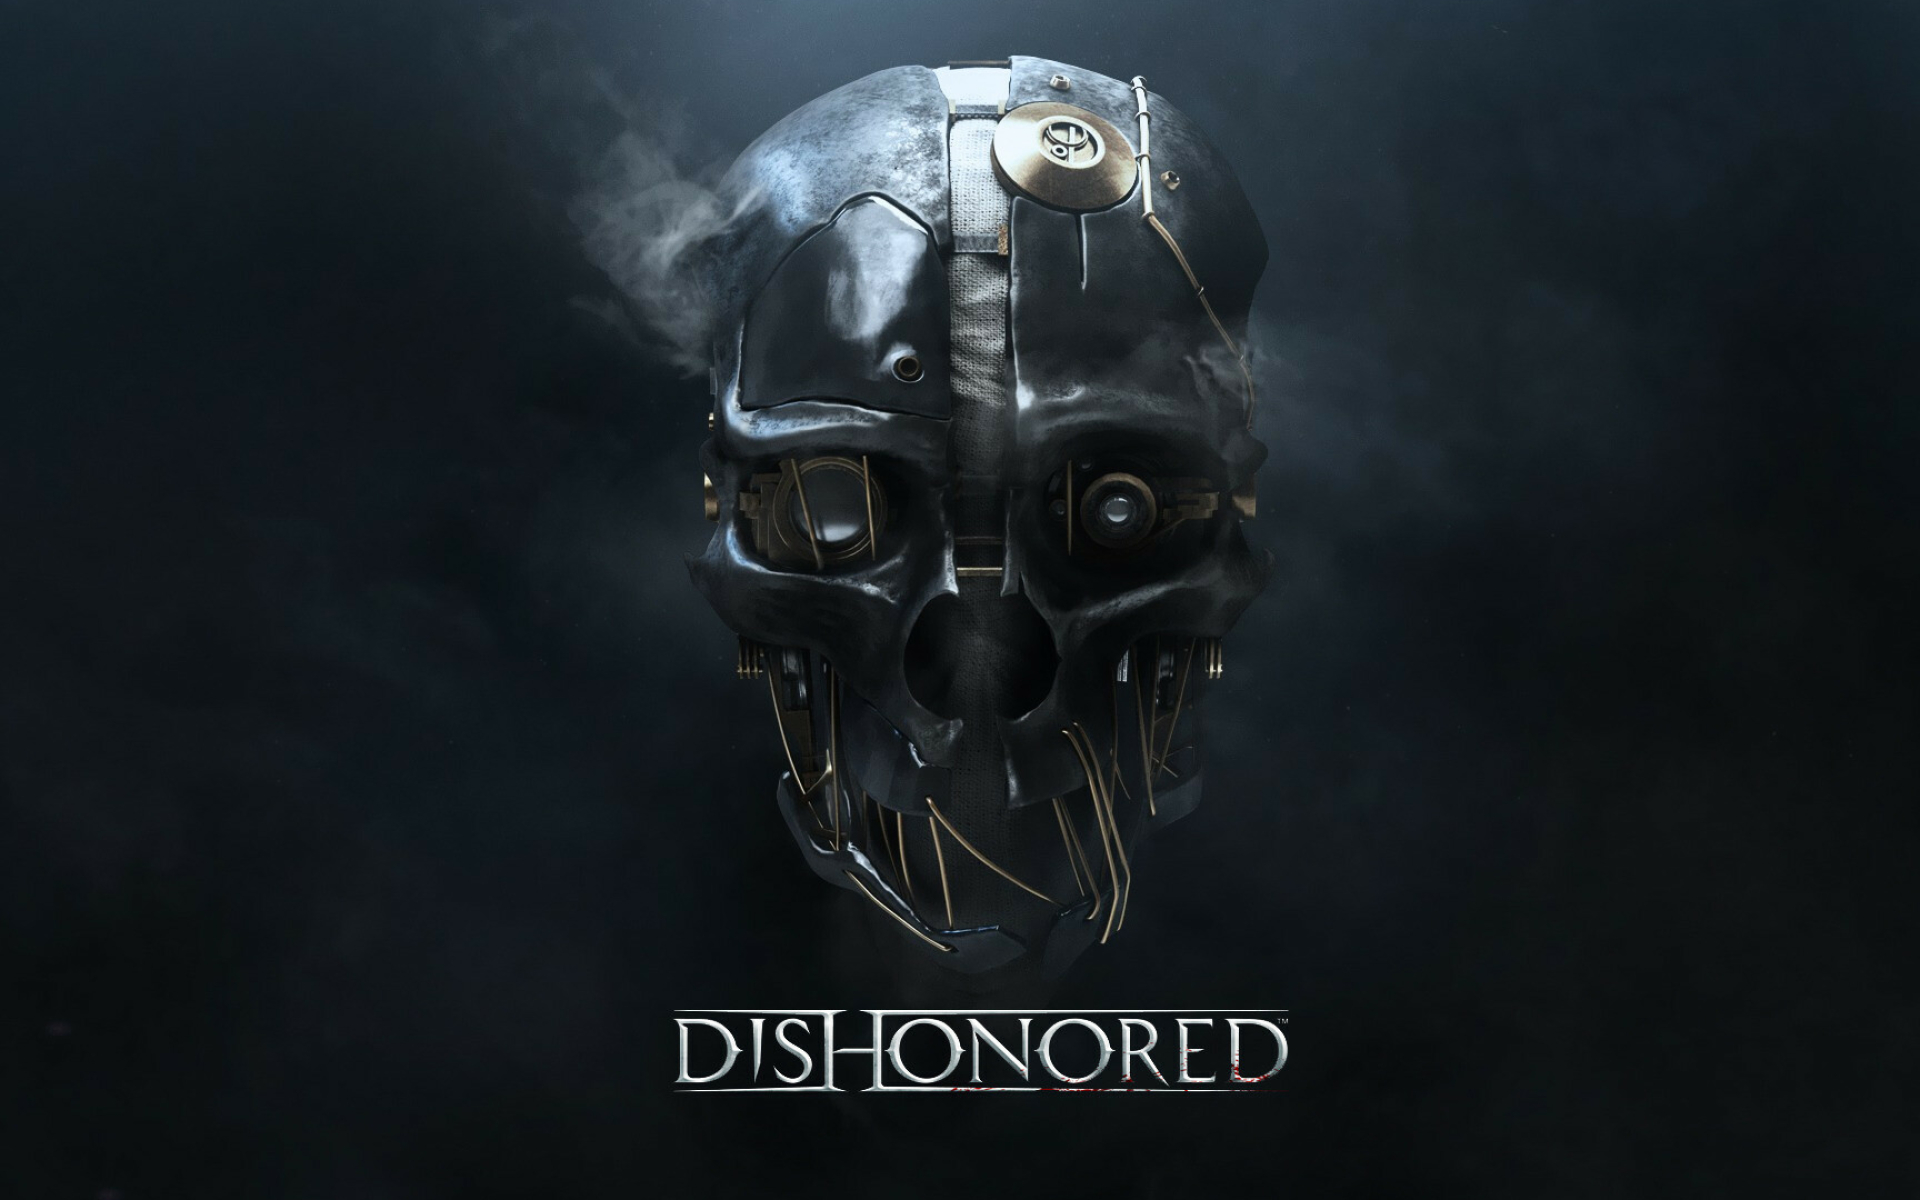 Dishonored: A first-person stealth action video game, Released in 2012. 1920x1200 HD Wallpaper.